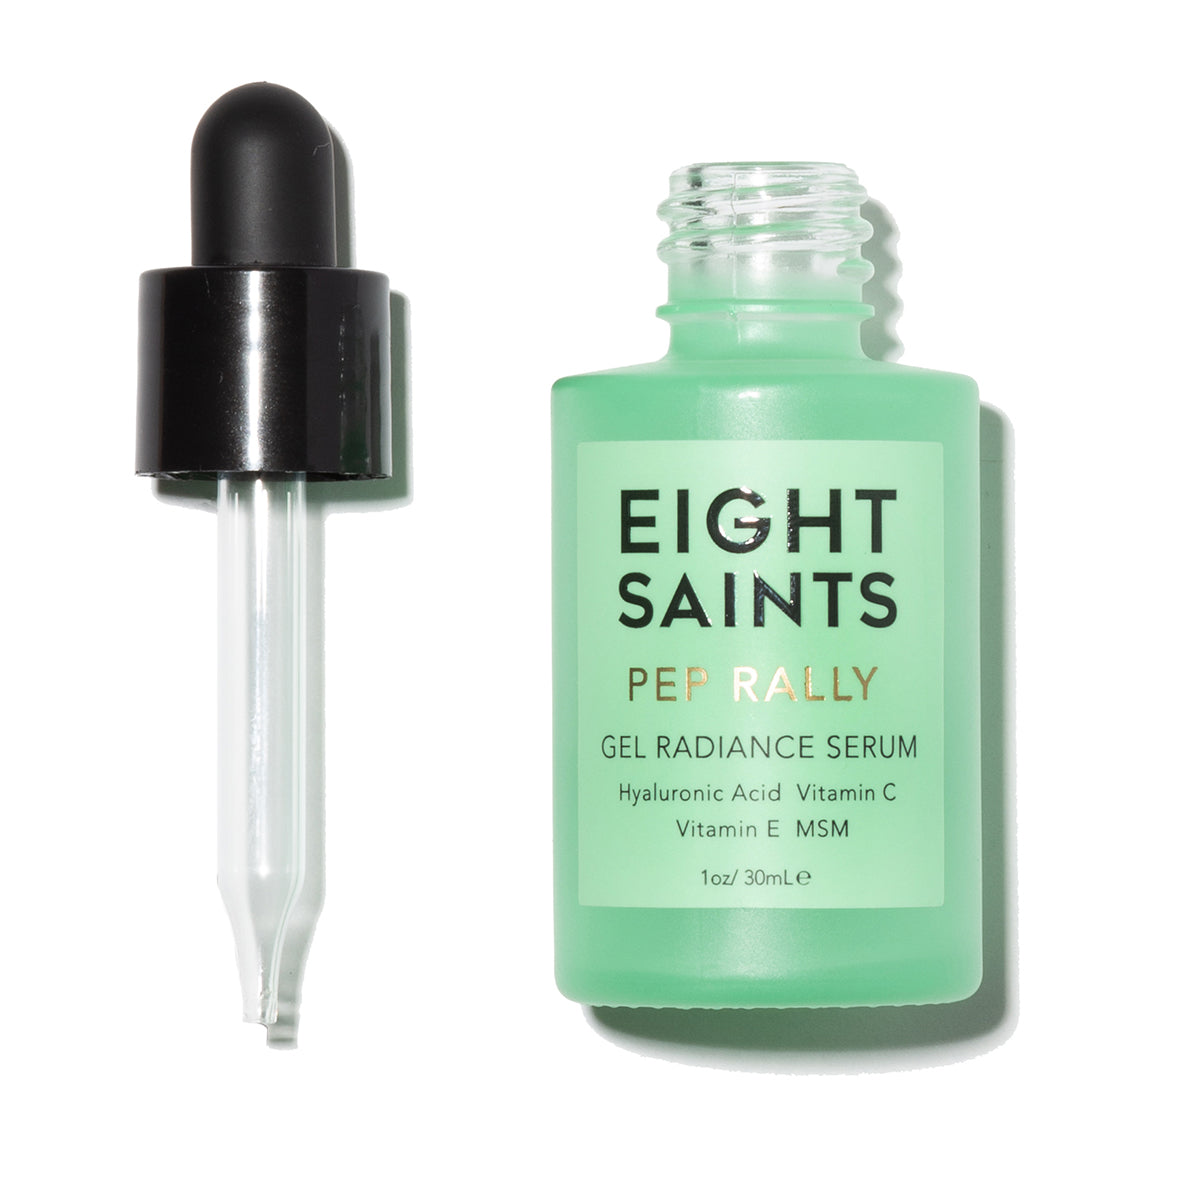 The best anti aging serum for face